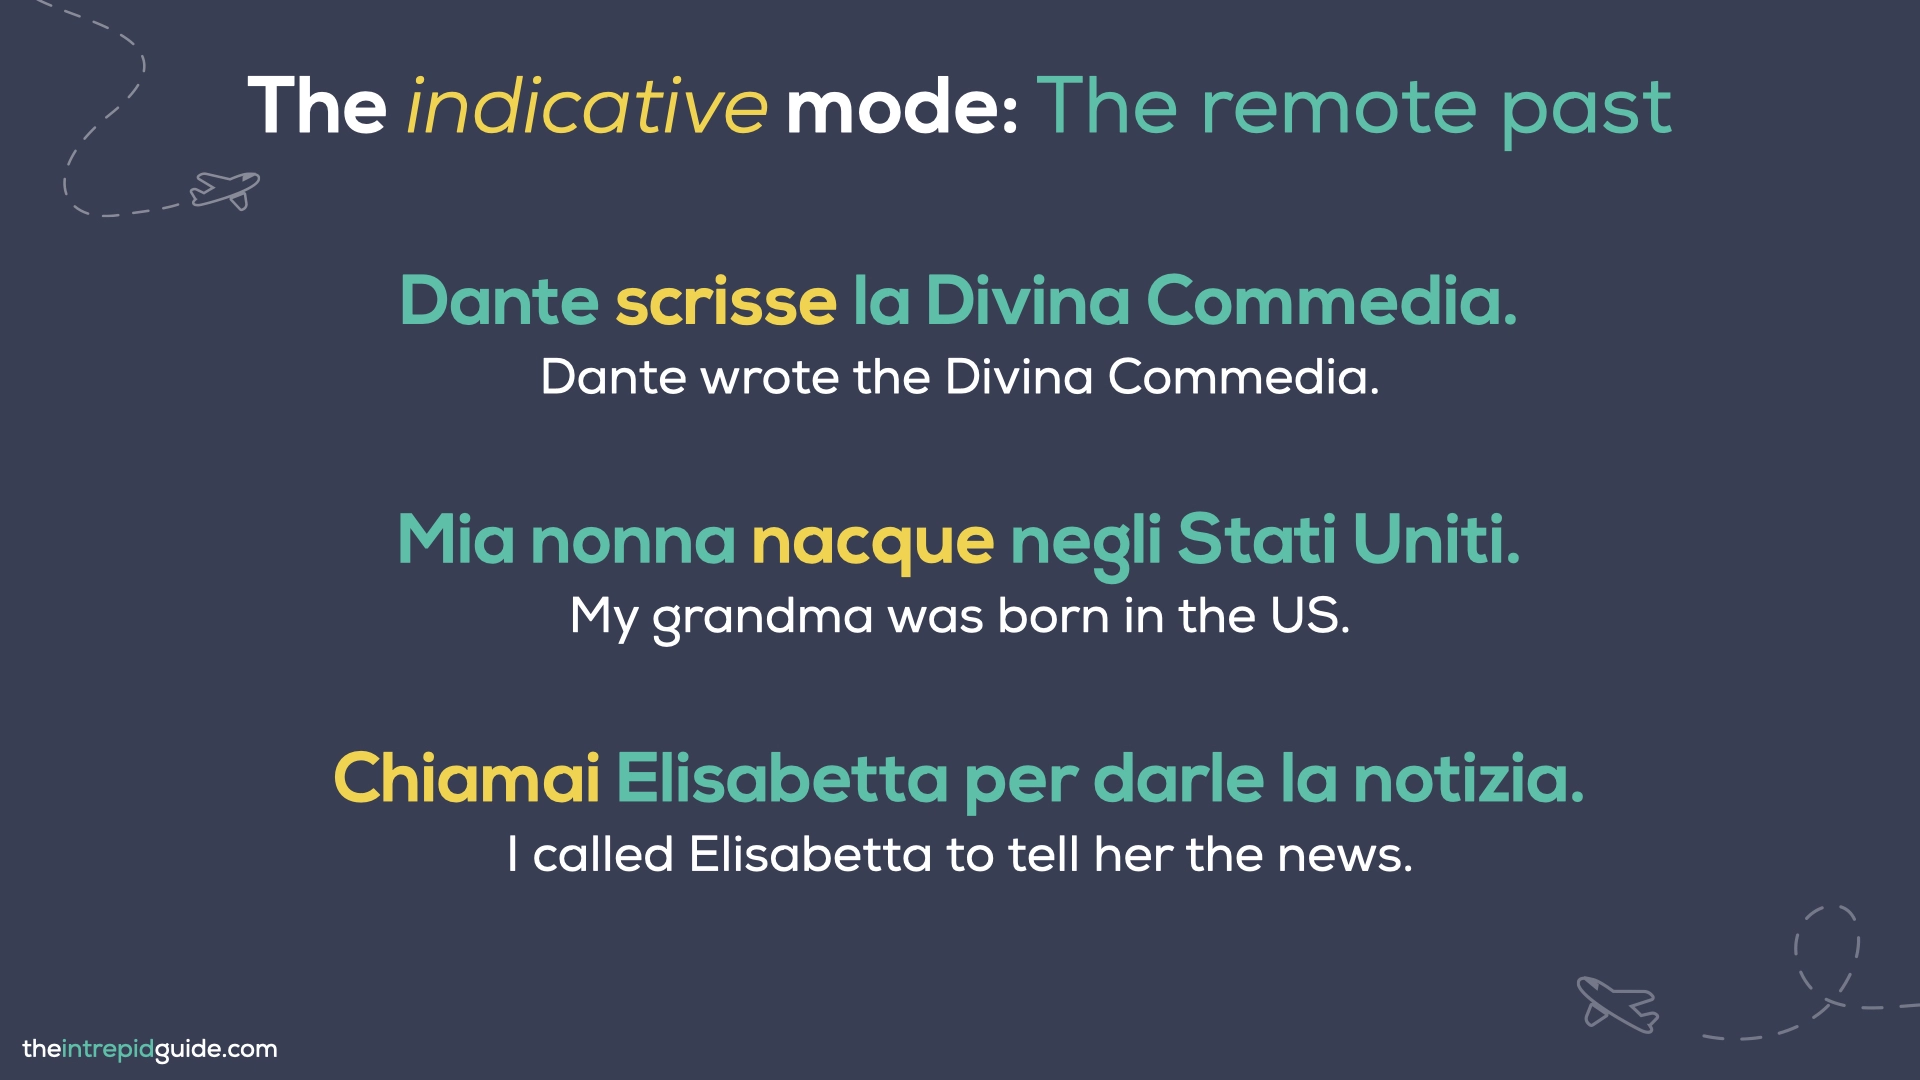 Italian tenses - The Indicative Mode - The Remote Past